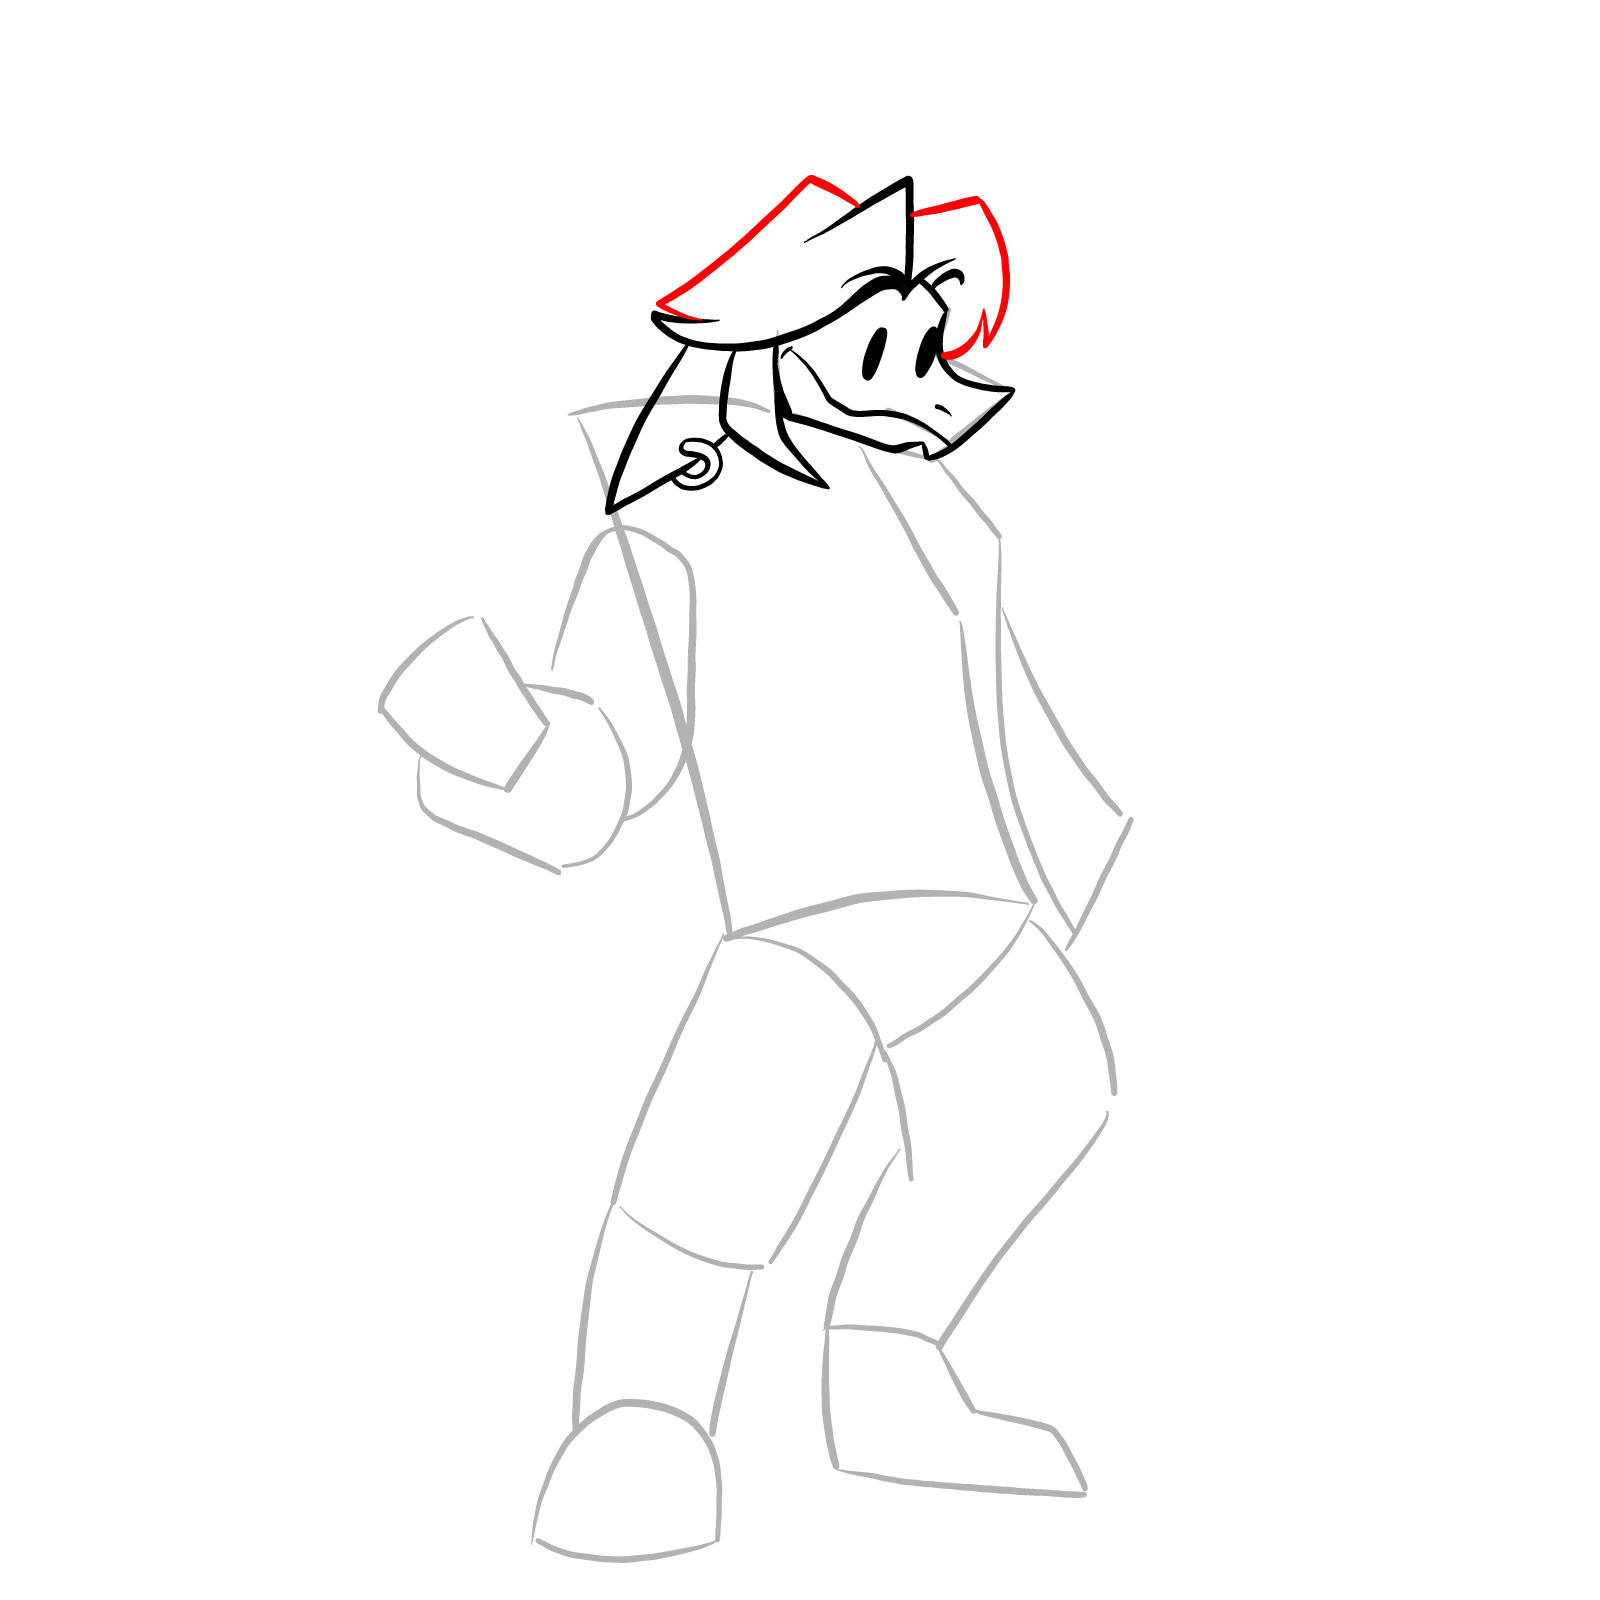 How to draw Ace from FNF - step 12